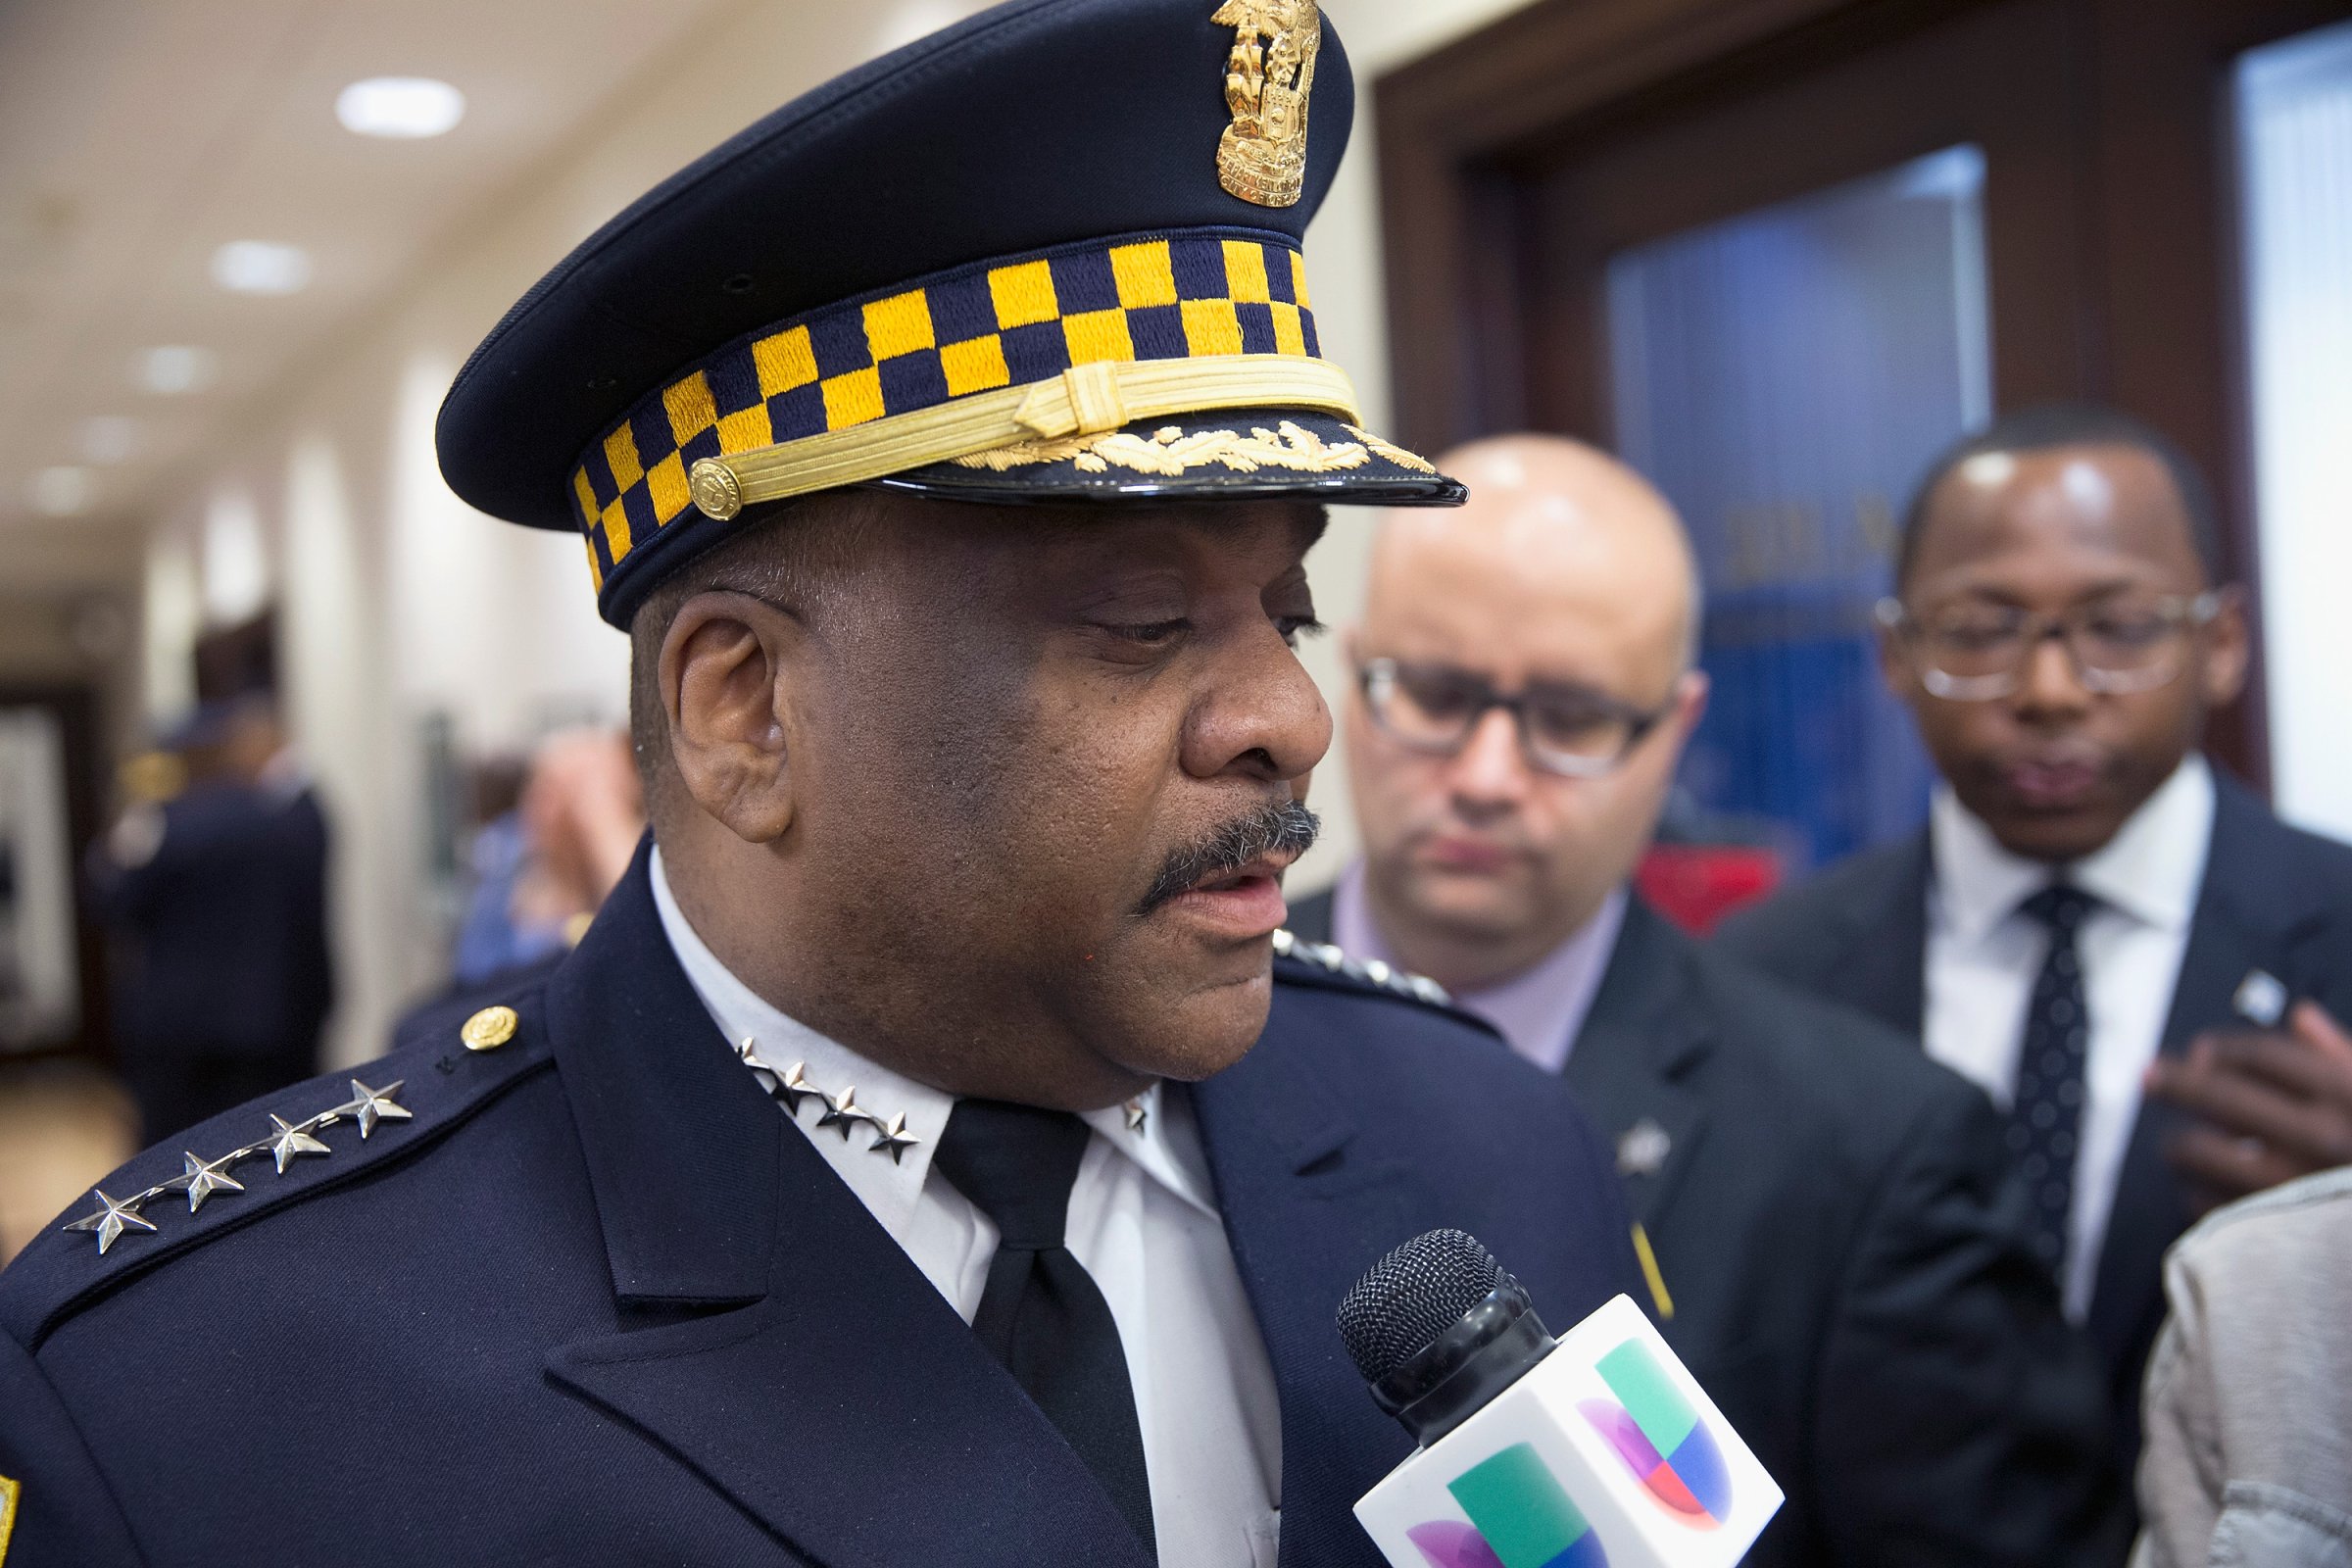 chicago police fire 7 officers laquan mcdonald shooting